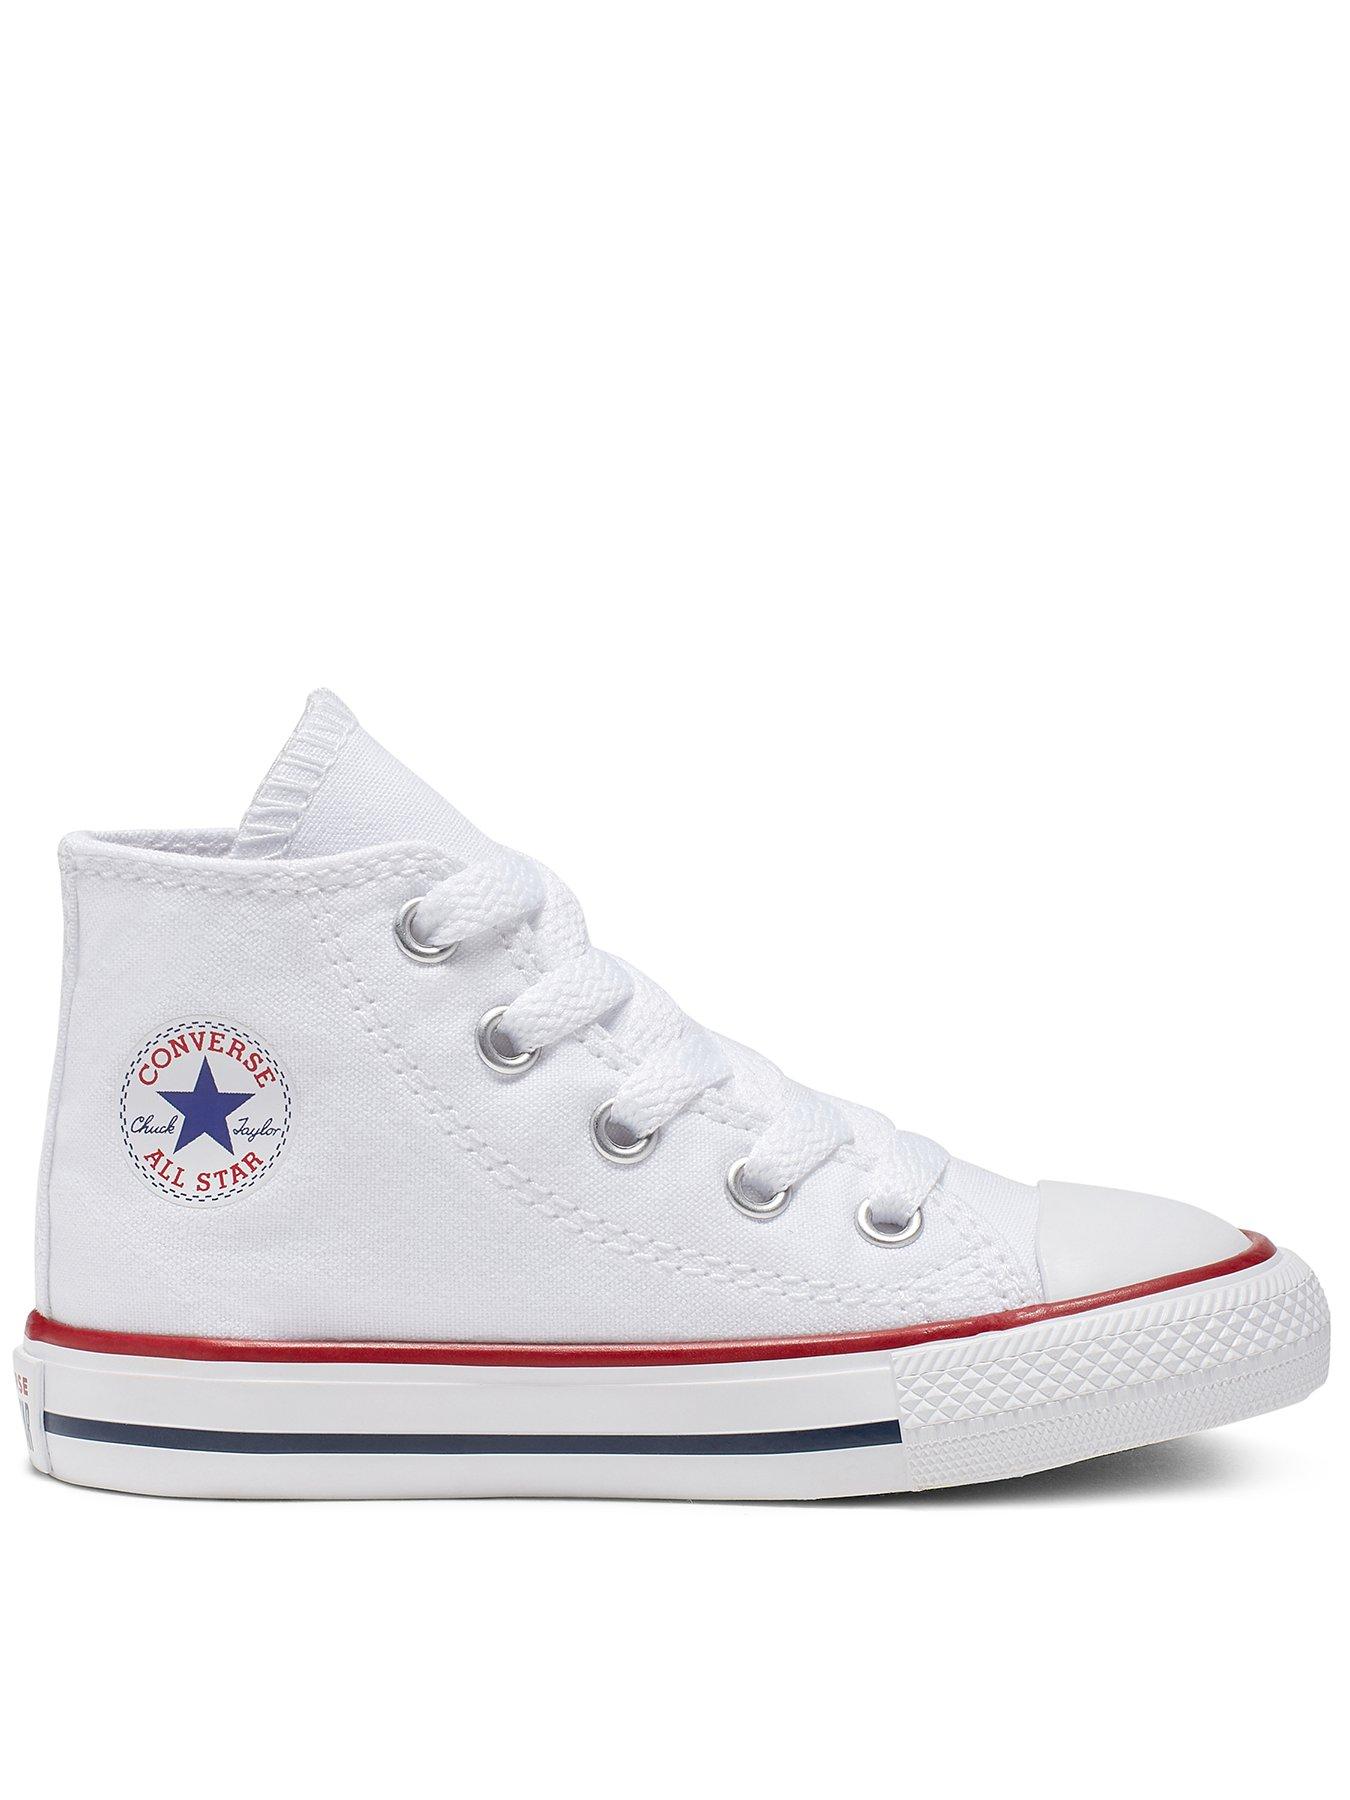 converse baby size 7